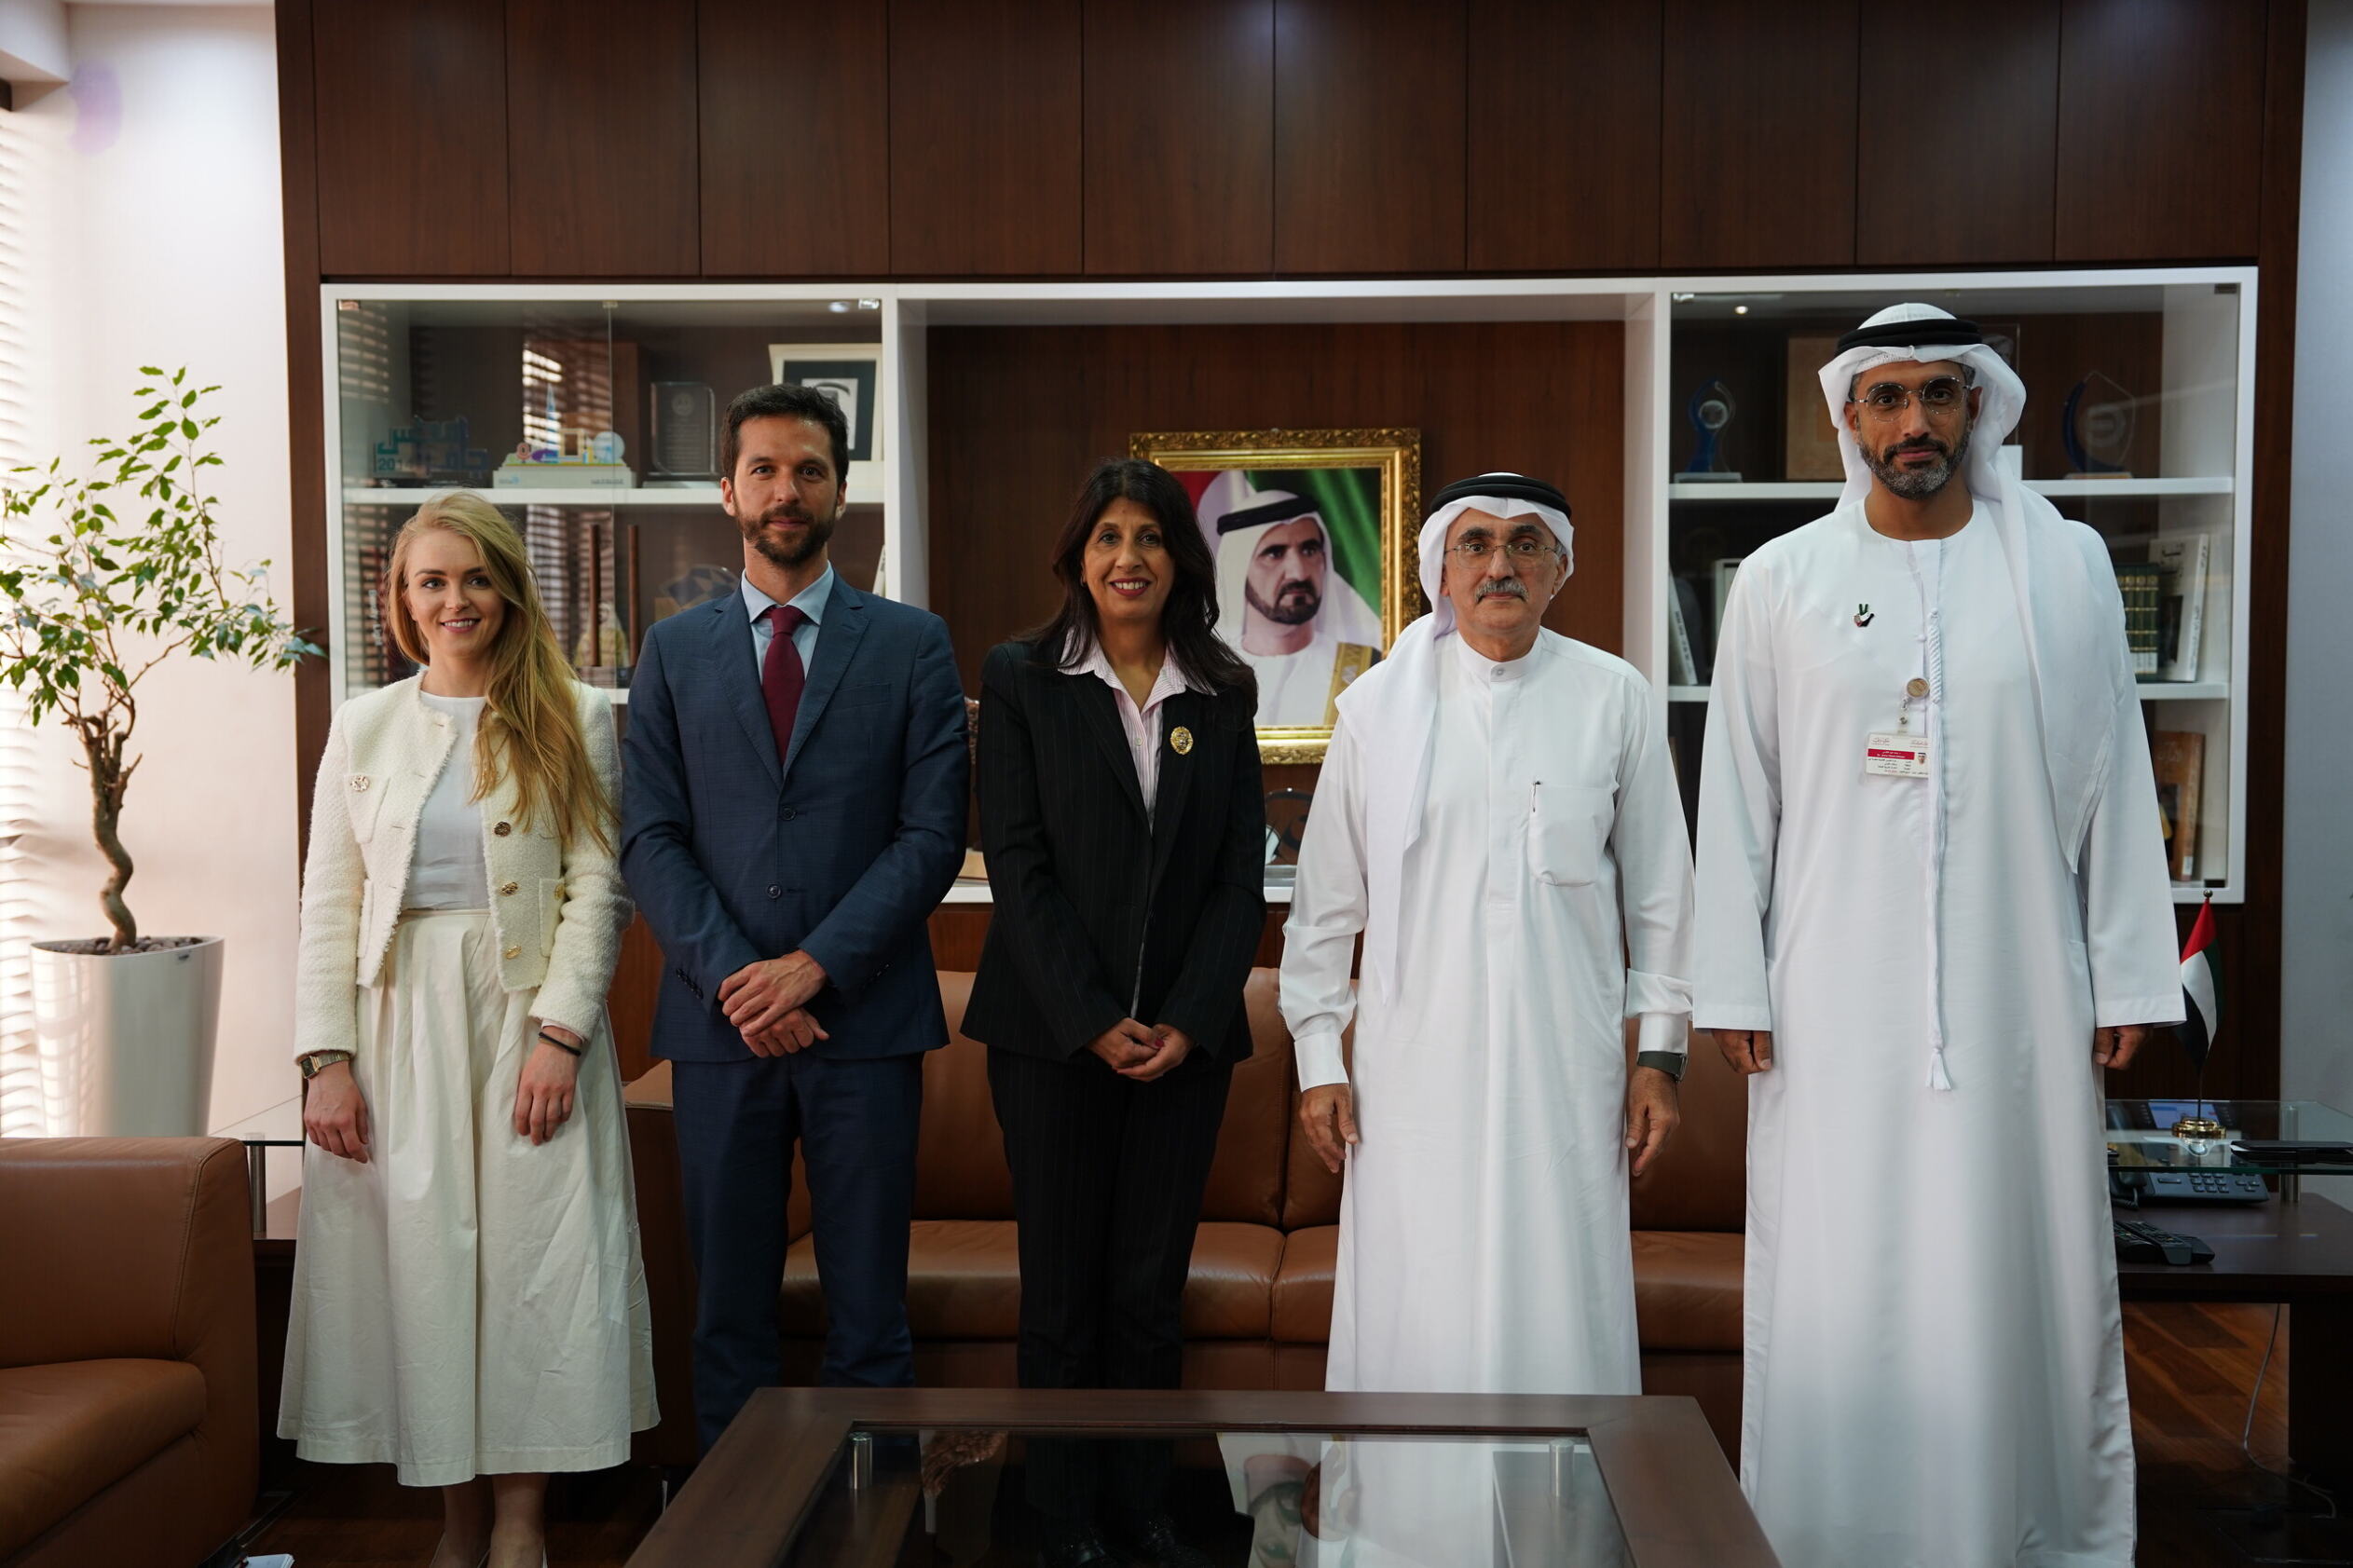   H.E Director General of the Government of Dubai Legal Affairs Department briefs President of the Law Society of England and Wales on the Emirate Practices in Regulating the Advocacy and Legal Consultancy Professions